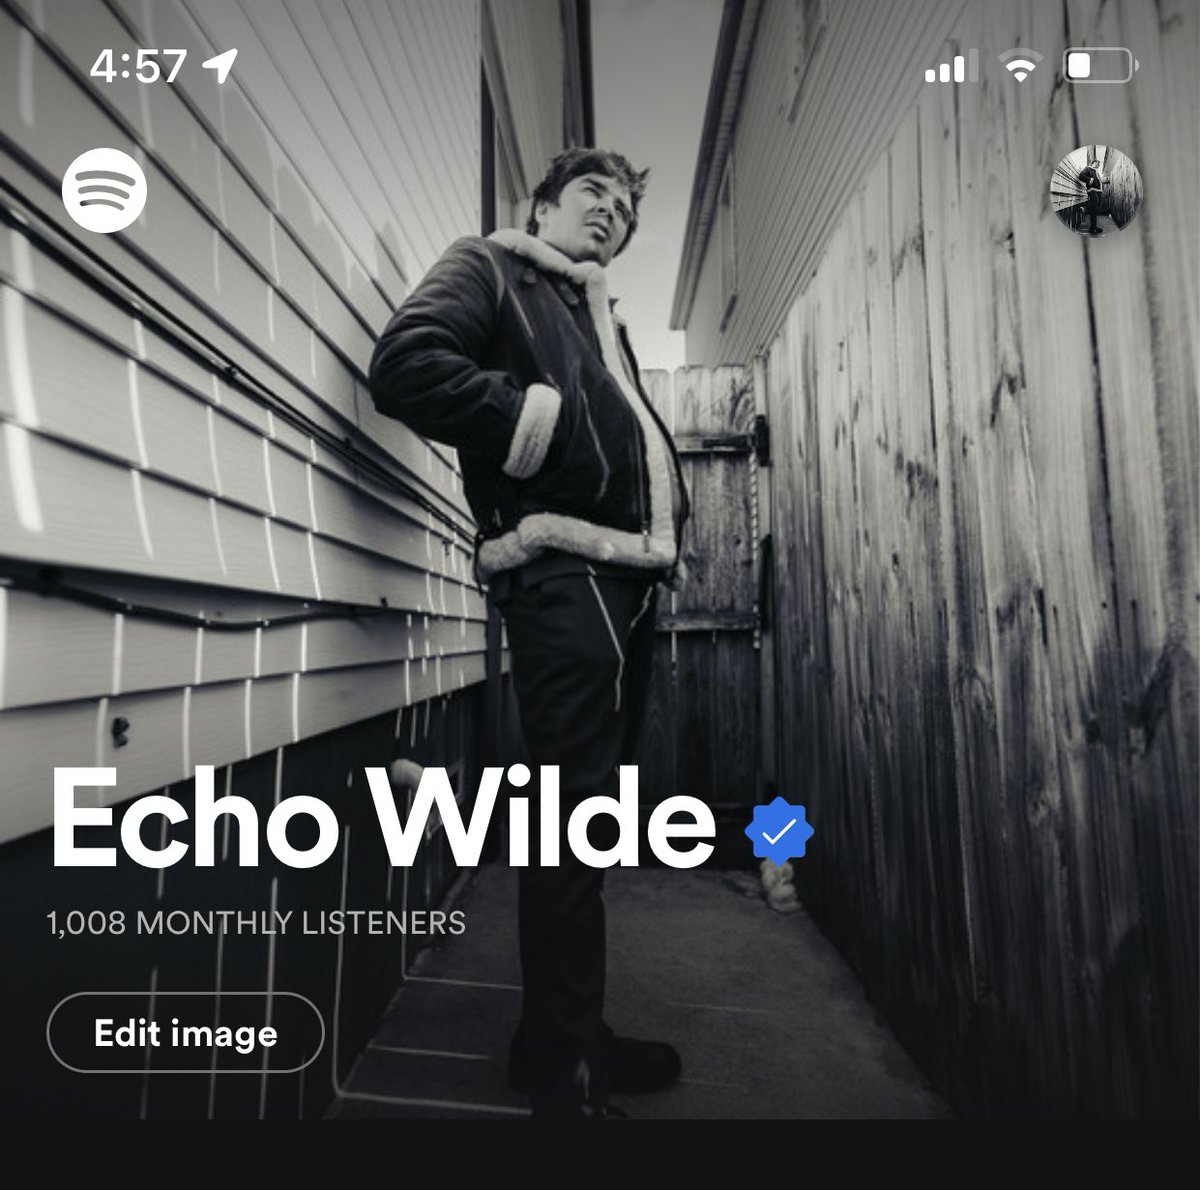 Reached a huge milestone today, with 1,000 monthly listeners on spotify! Thanks to everyone who has supported so far! #echowilde #indiemusic #altpop #bedroompop #StopPayola